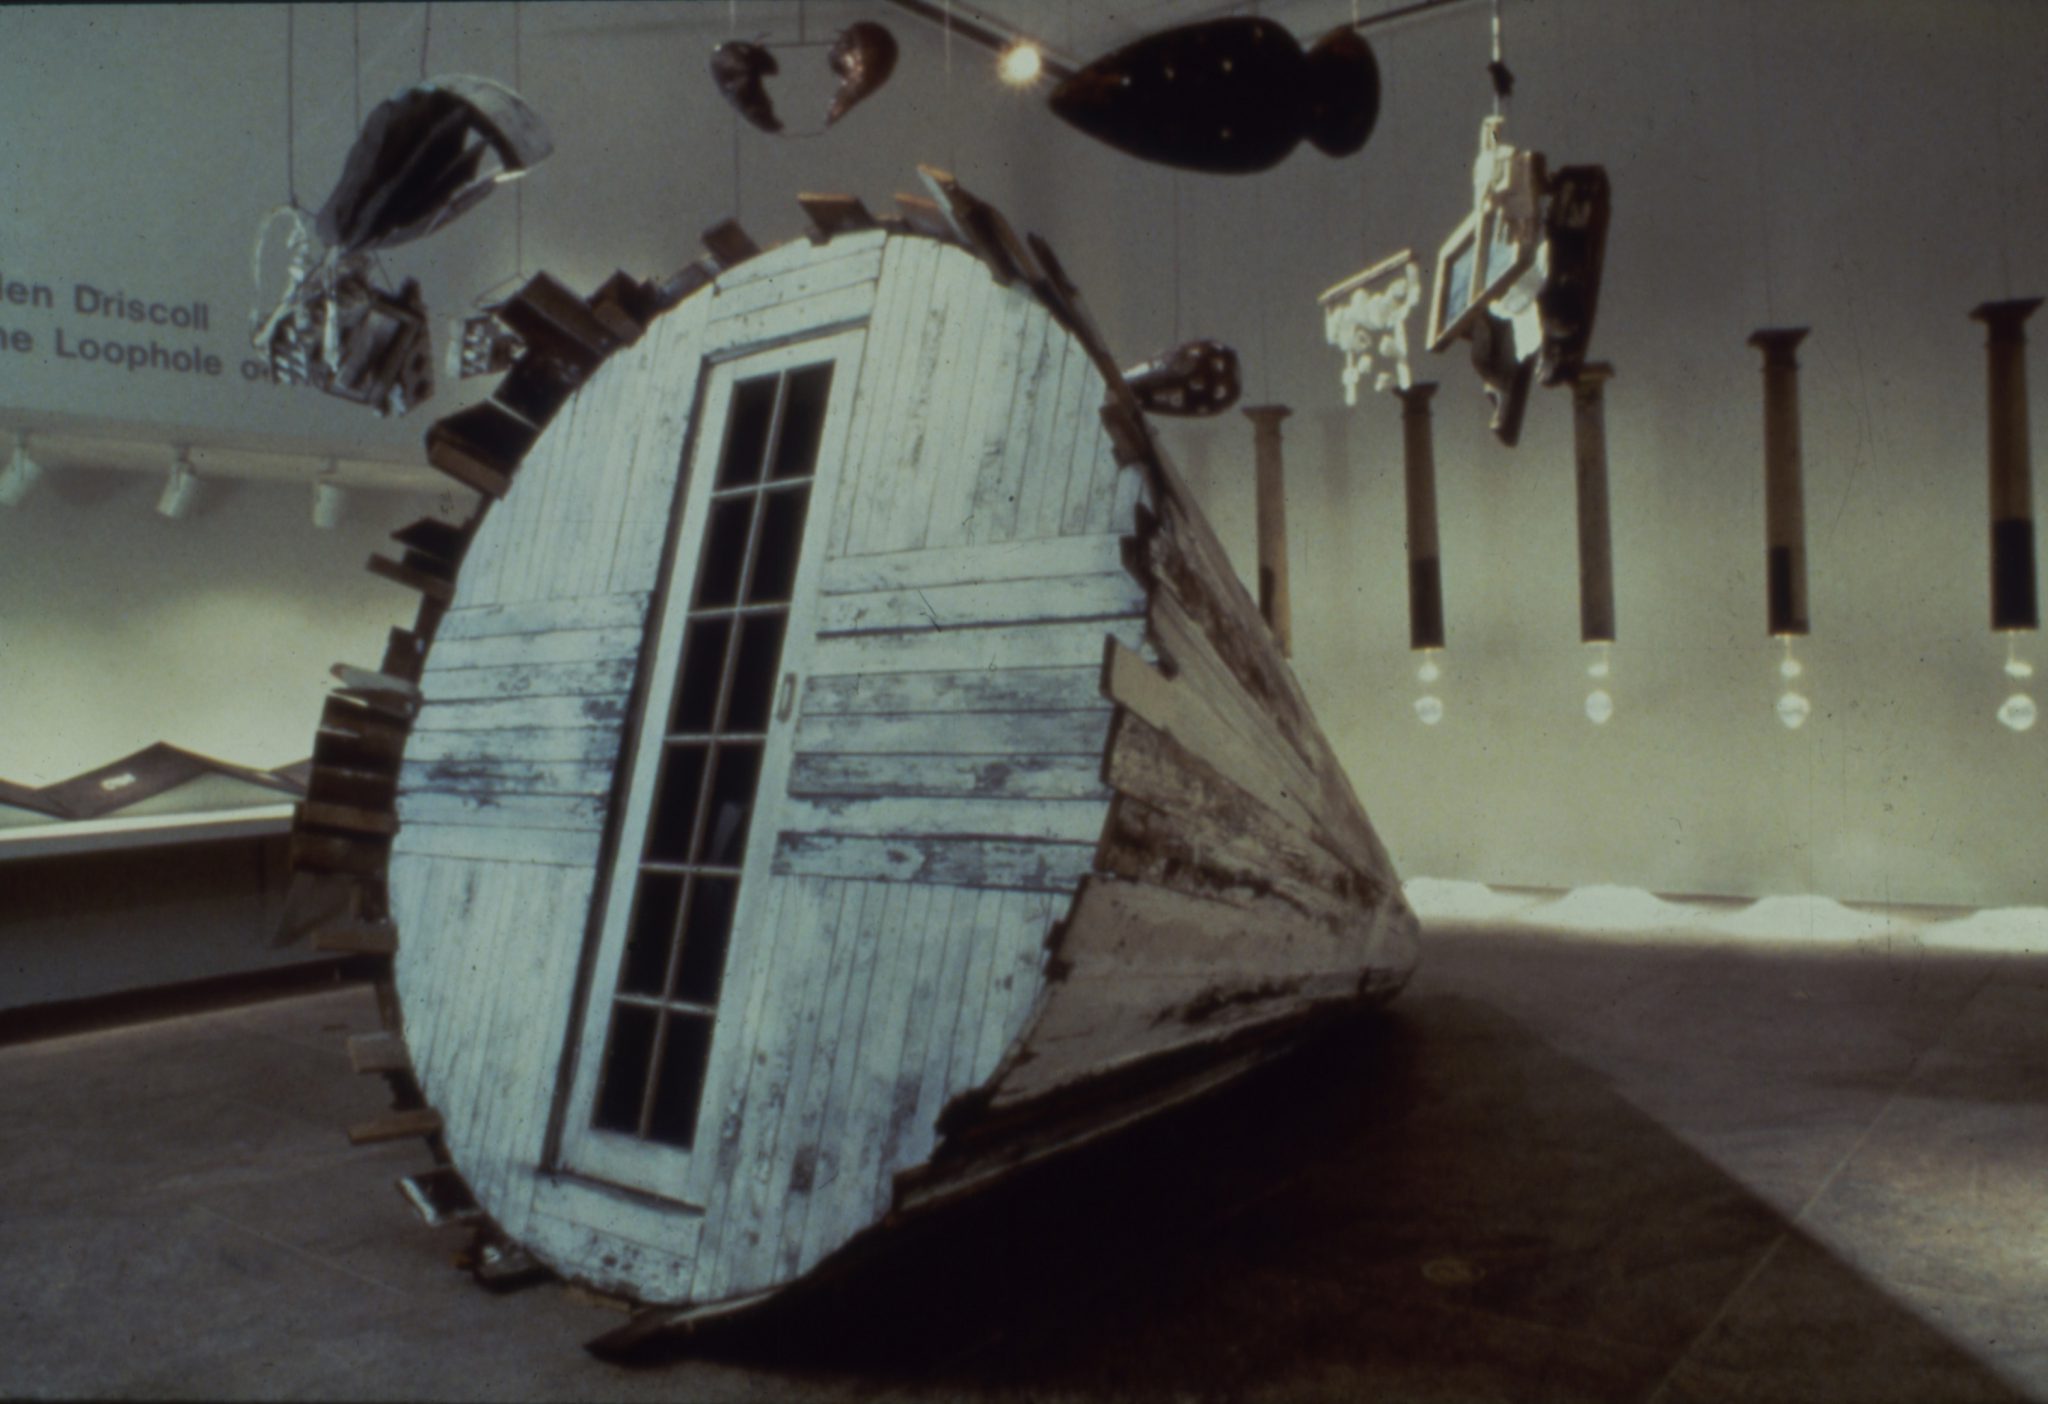 Ellen Driscoll, The Loophole of Retreat, 1990–91. 13’ x 8’ diameter wooden cone, 12 mixed media objects on motorized wheel, 7 suspended columns with interior lights receiving shadow images on salt piles on the floor, and a 22’ x 22” accordion book. Photo by George Hirose.